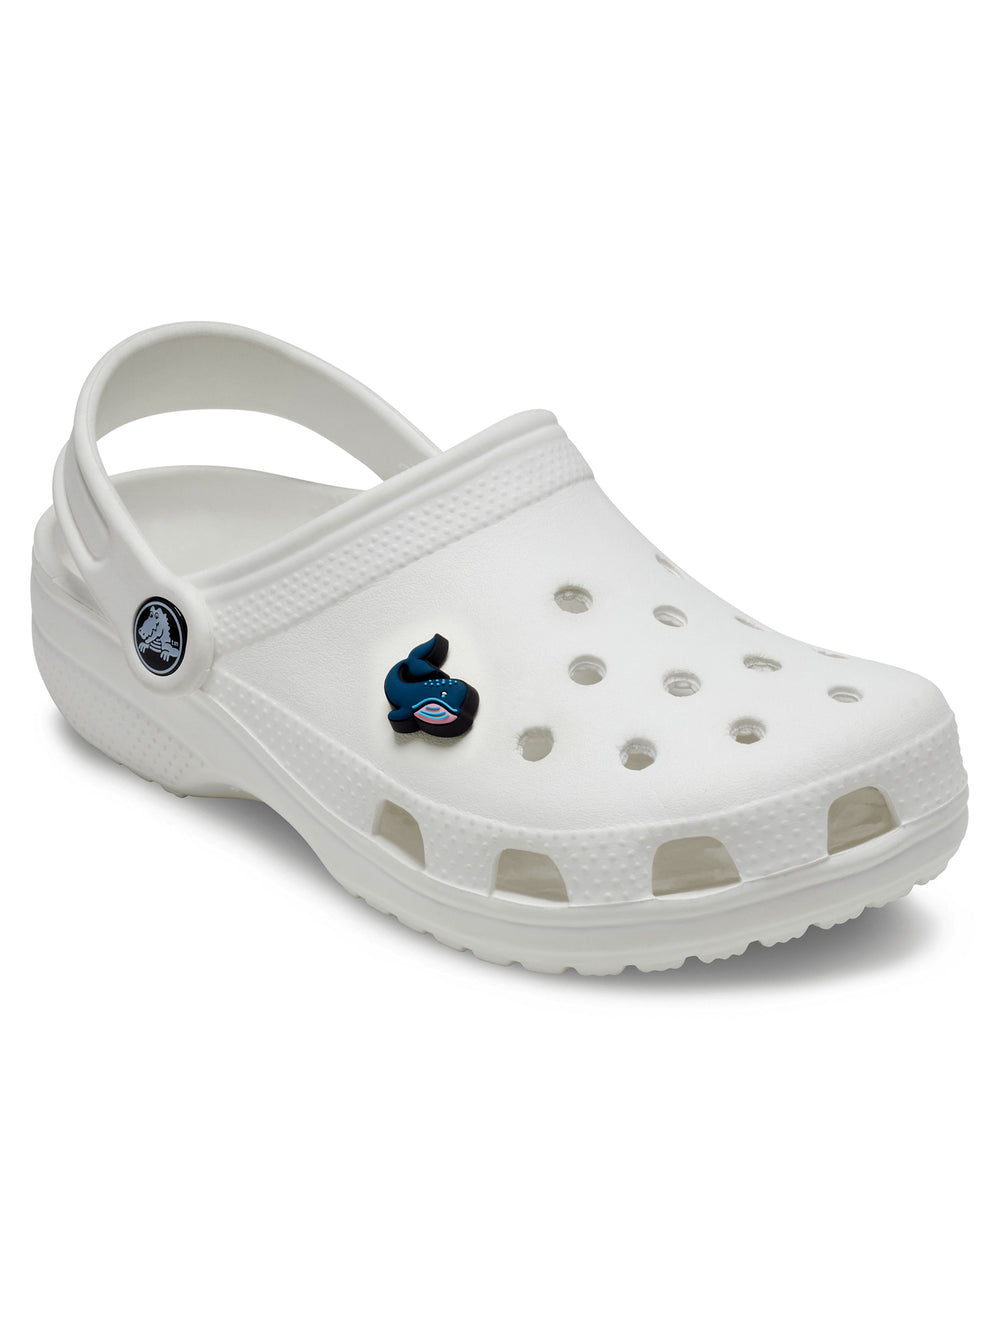 CROCS JIBBITZ - WHILLY WHALE - DÉSTOCKAGE